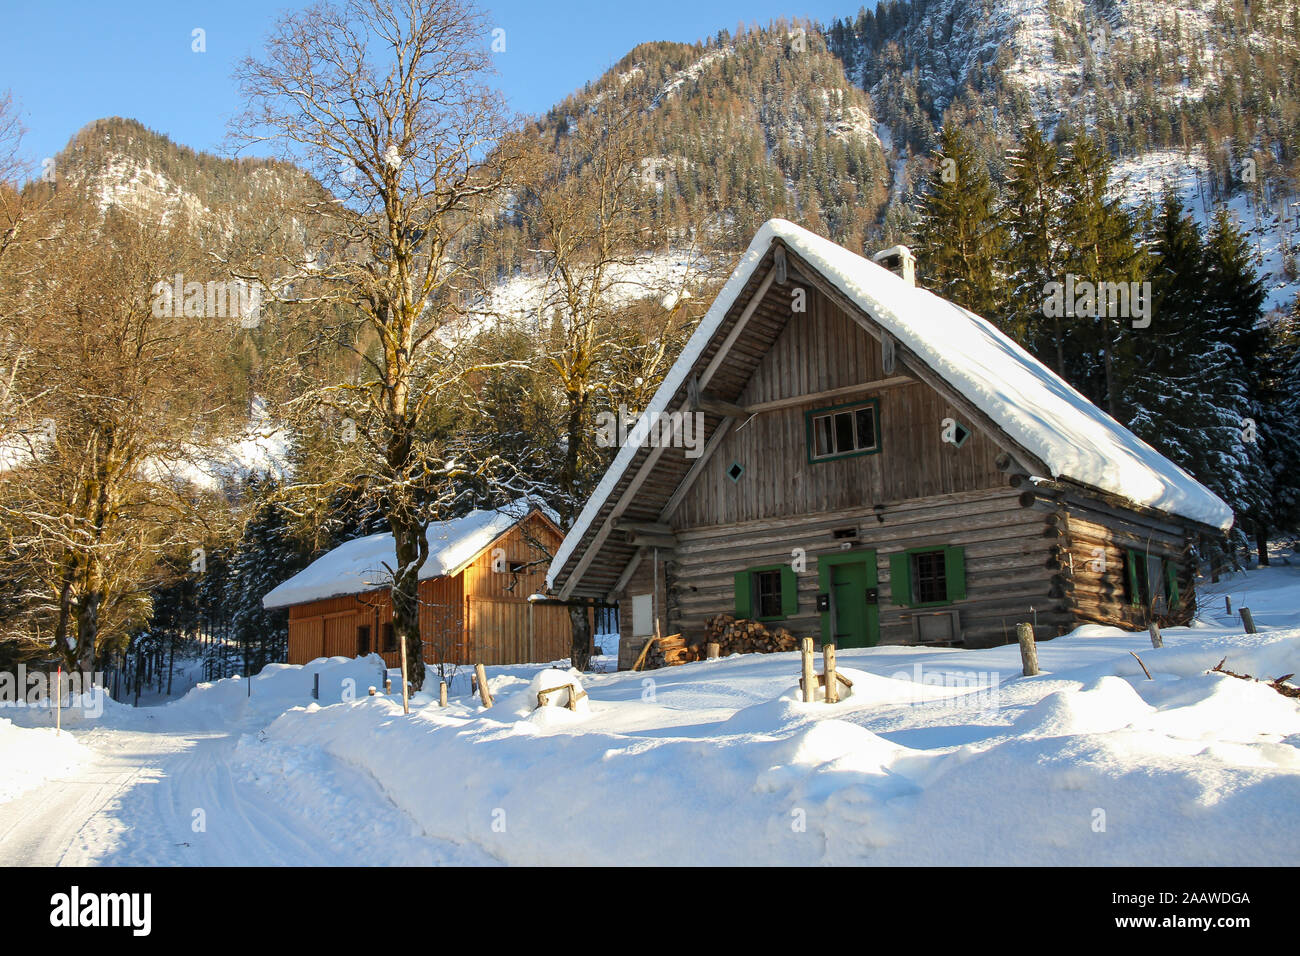 Nice little alpine chalet with a pile of wood in front covered in snow. Typical scene for the European Alps with mountains and trees in the background Stock Photo